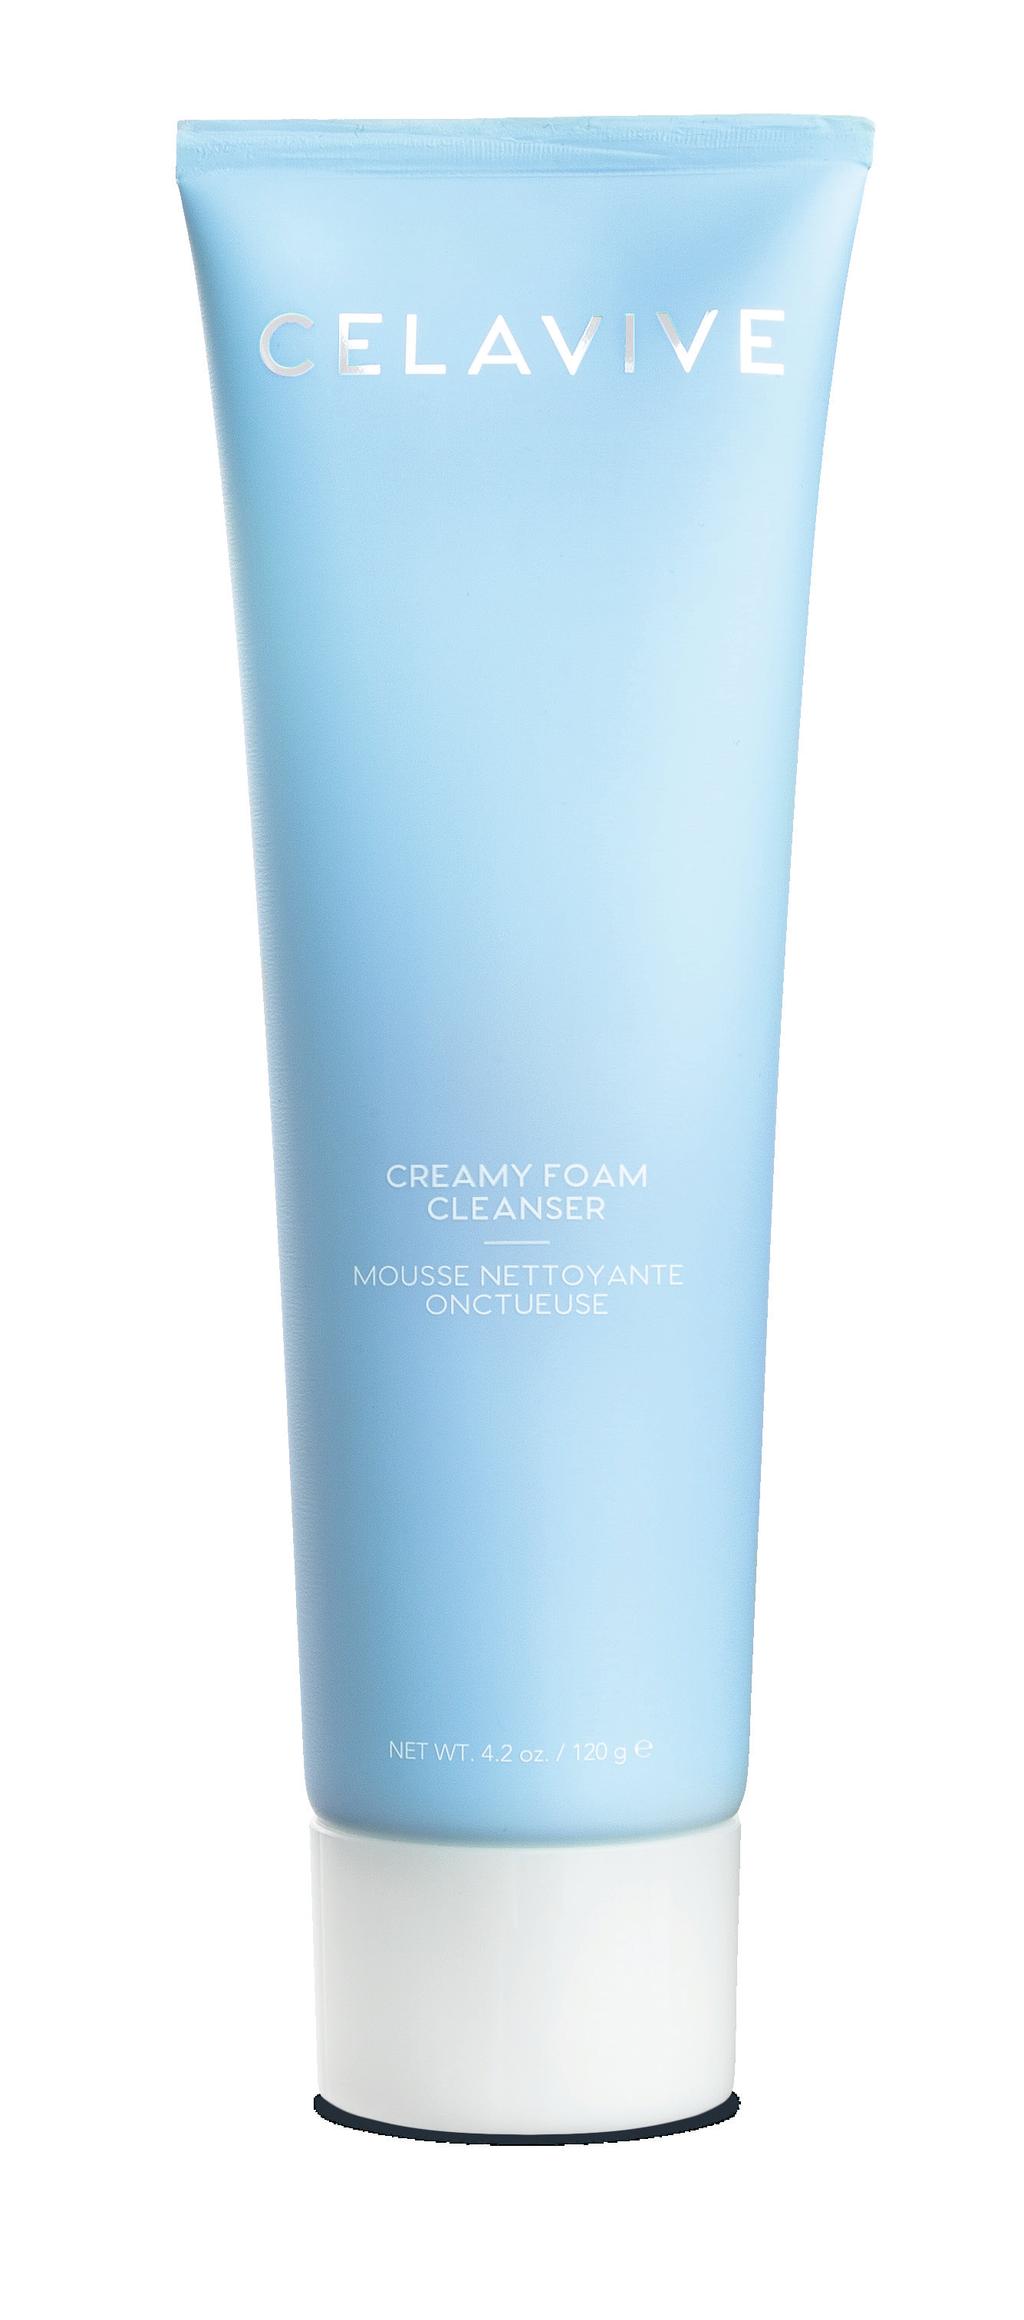 CLEANSE Lather Up to Gorgeous Skin CREAMY FOAM CLEANSER This creamy cleanser creates a rich lather that lifts away dirt and oil while gently exfoliating dull, dry skin.